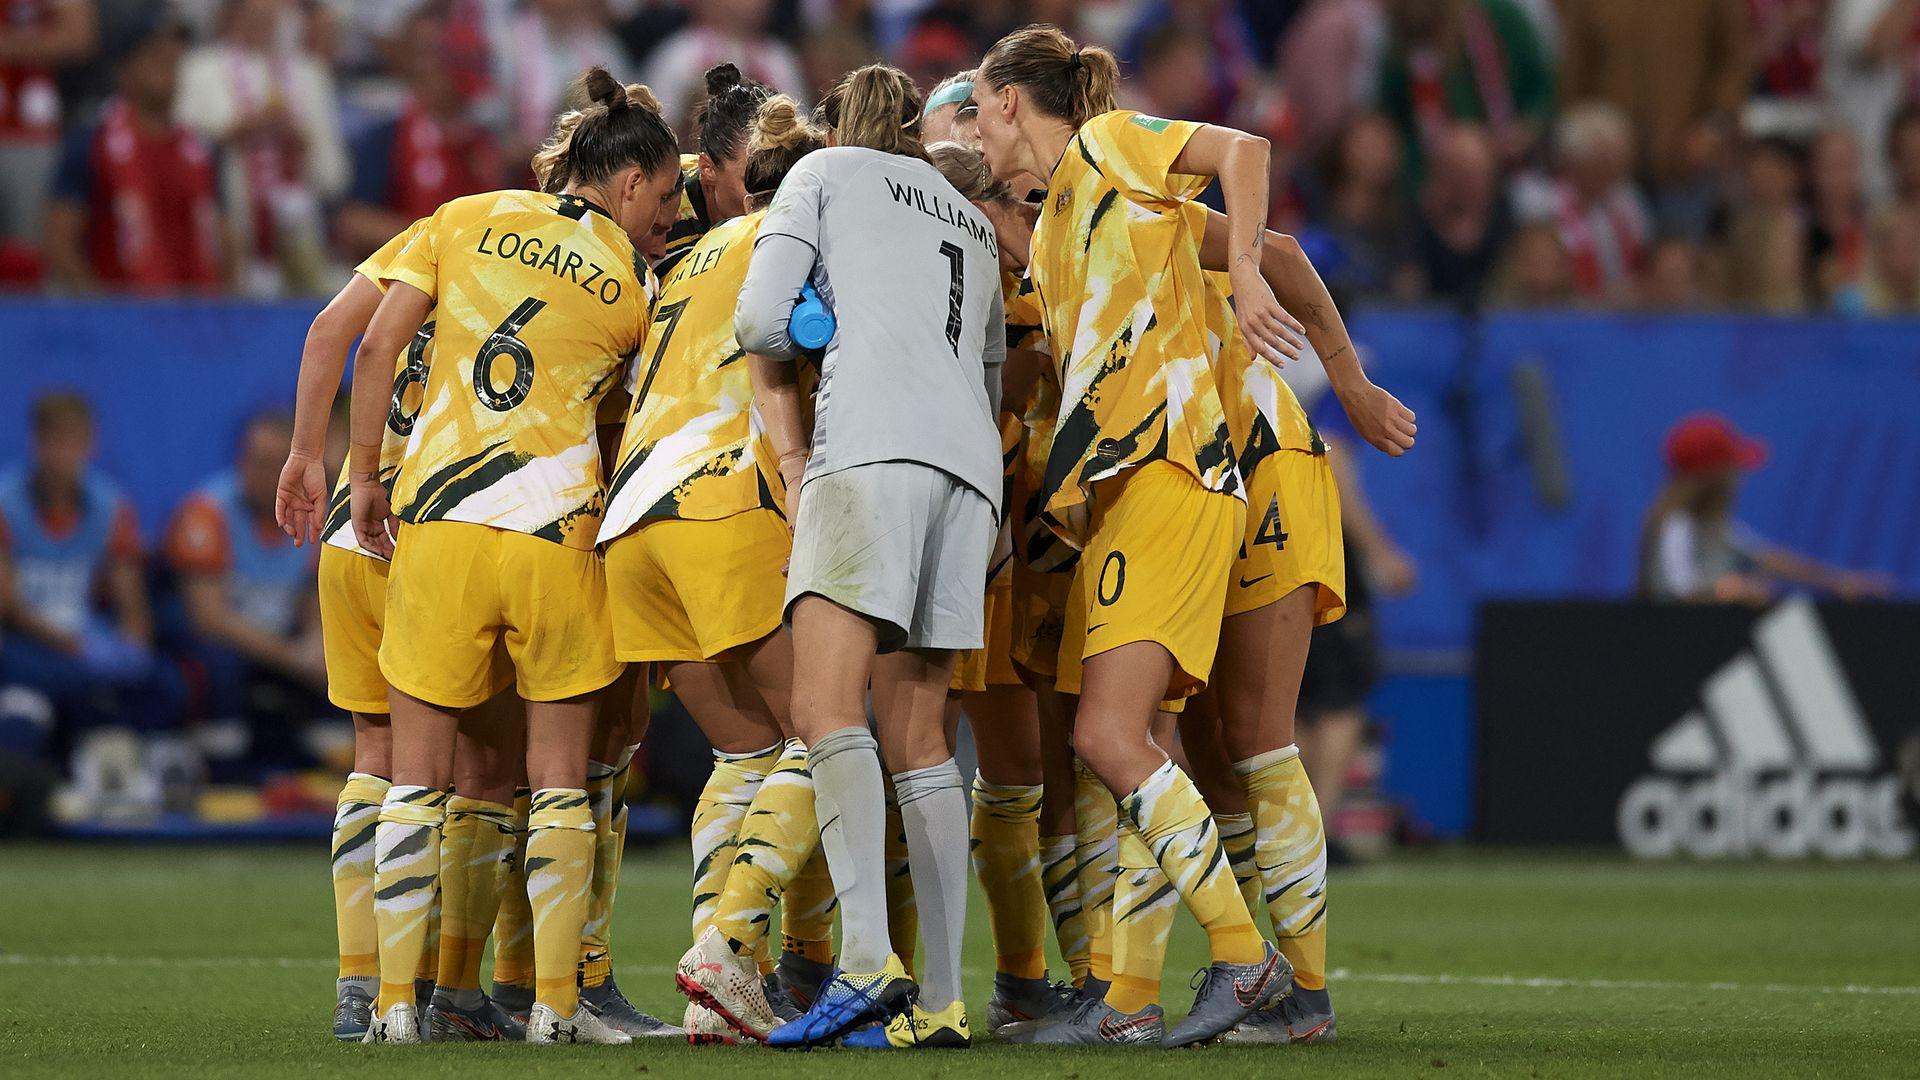 Australia women's soccer players to get equal pay after historic deal